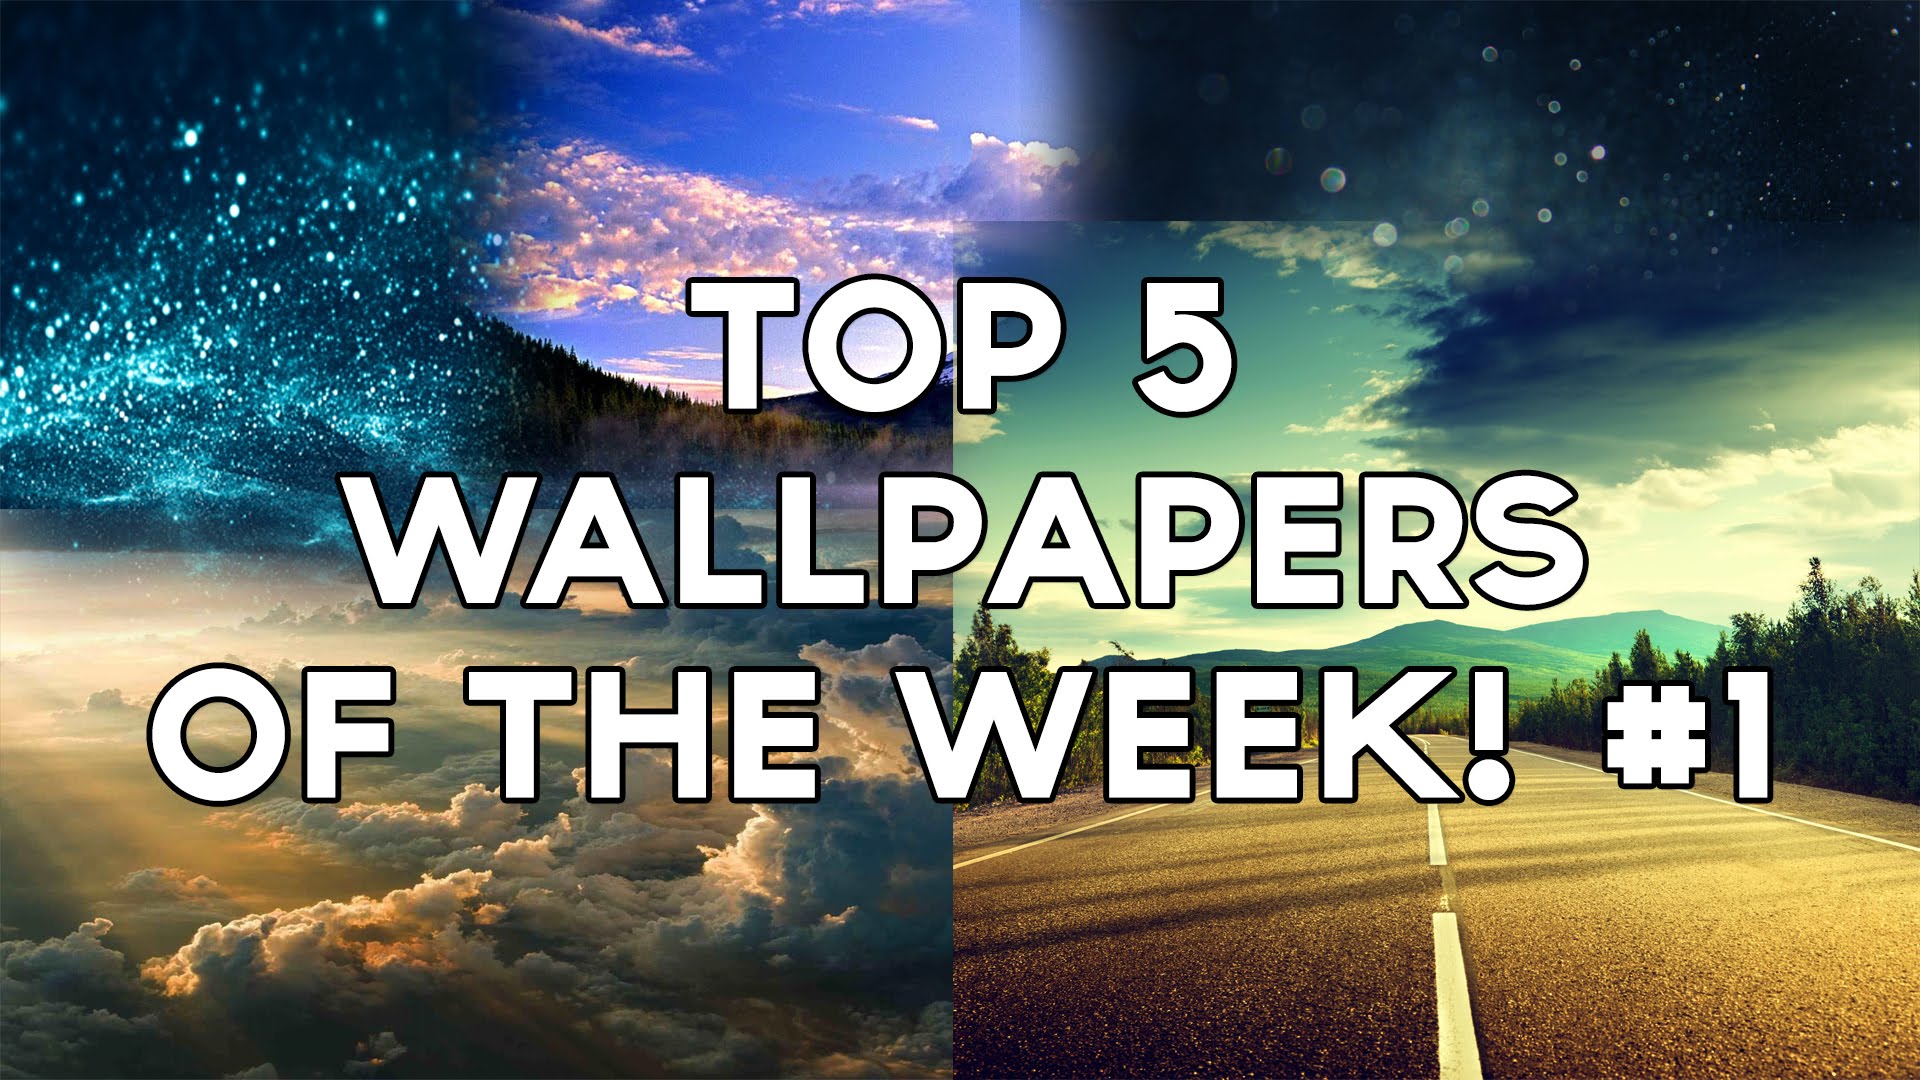 Top 5 Wallpapers of the Week! #1 - YouTube